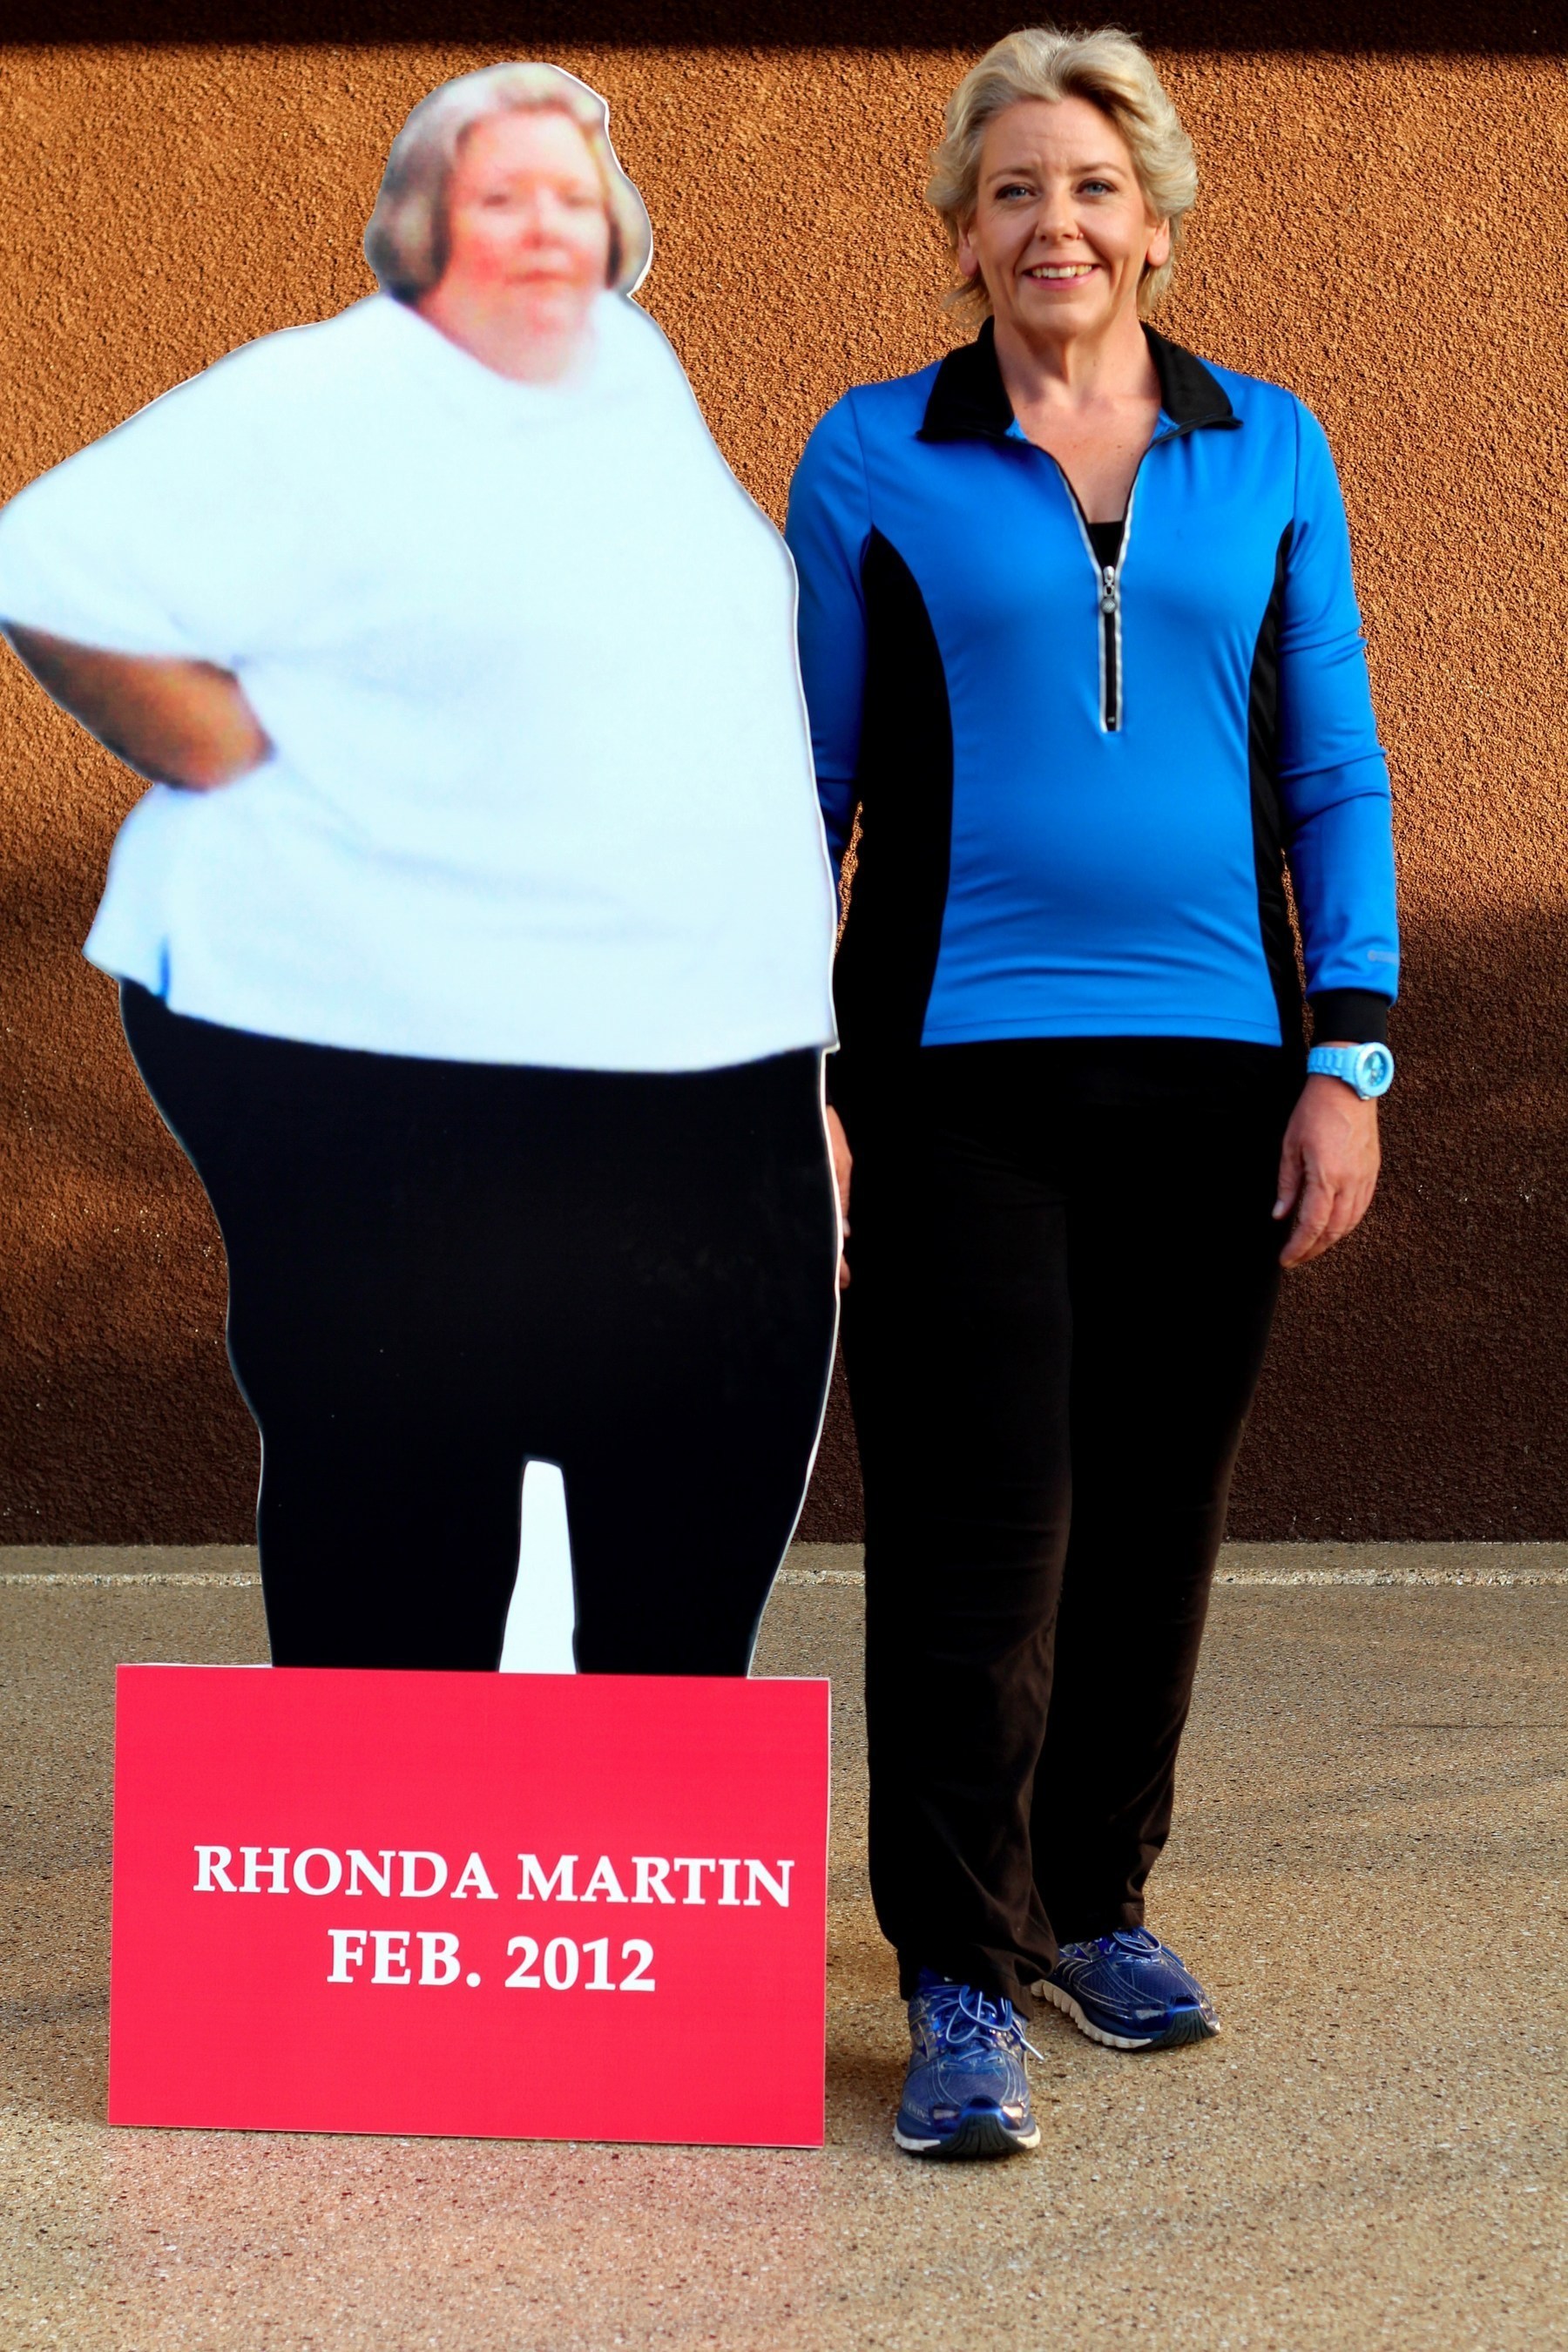 With the help of her Pedego electric bike, Rhonda Martin dropped 277 pounds, all while having fun!